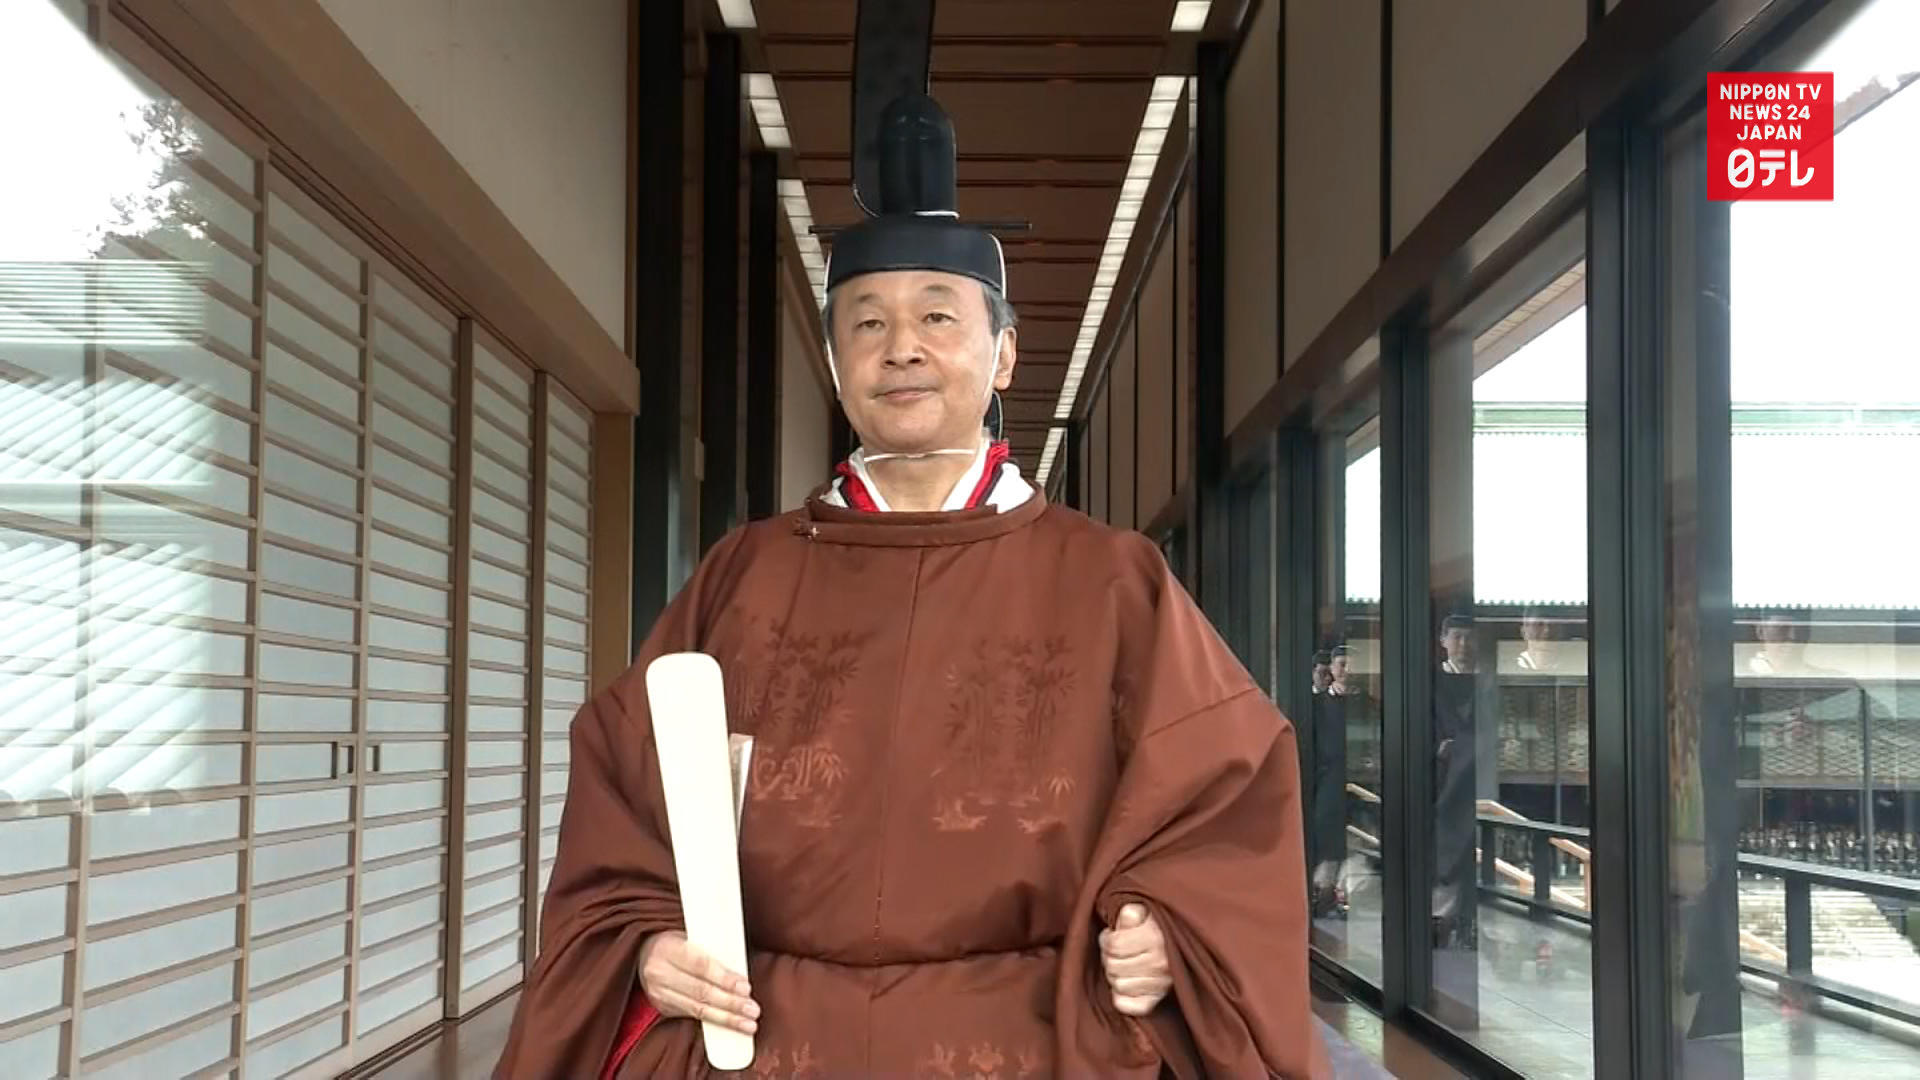 Emperor proclaims enthronement in palace ceremony